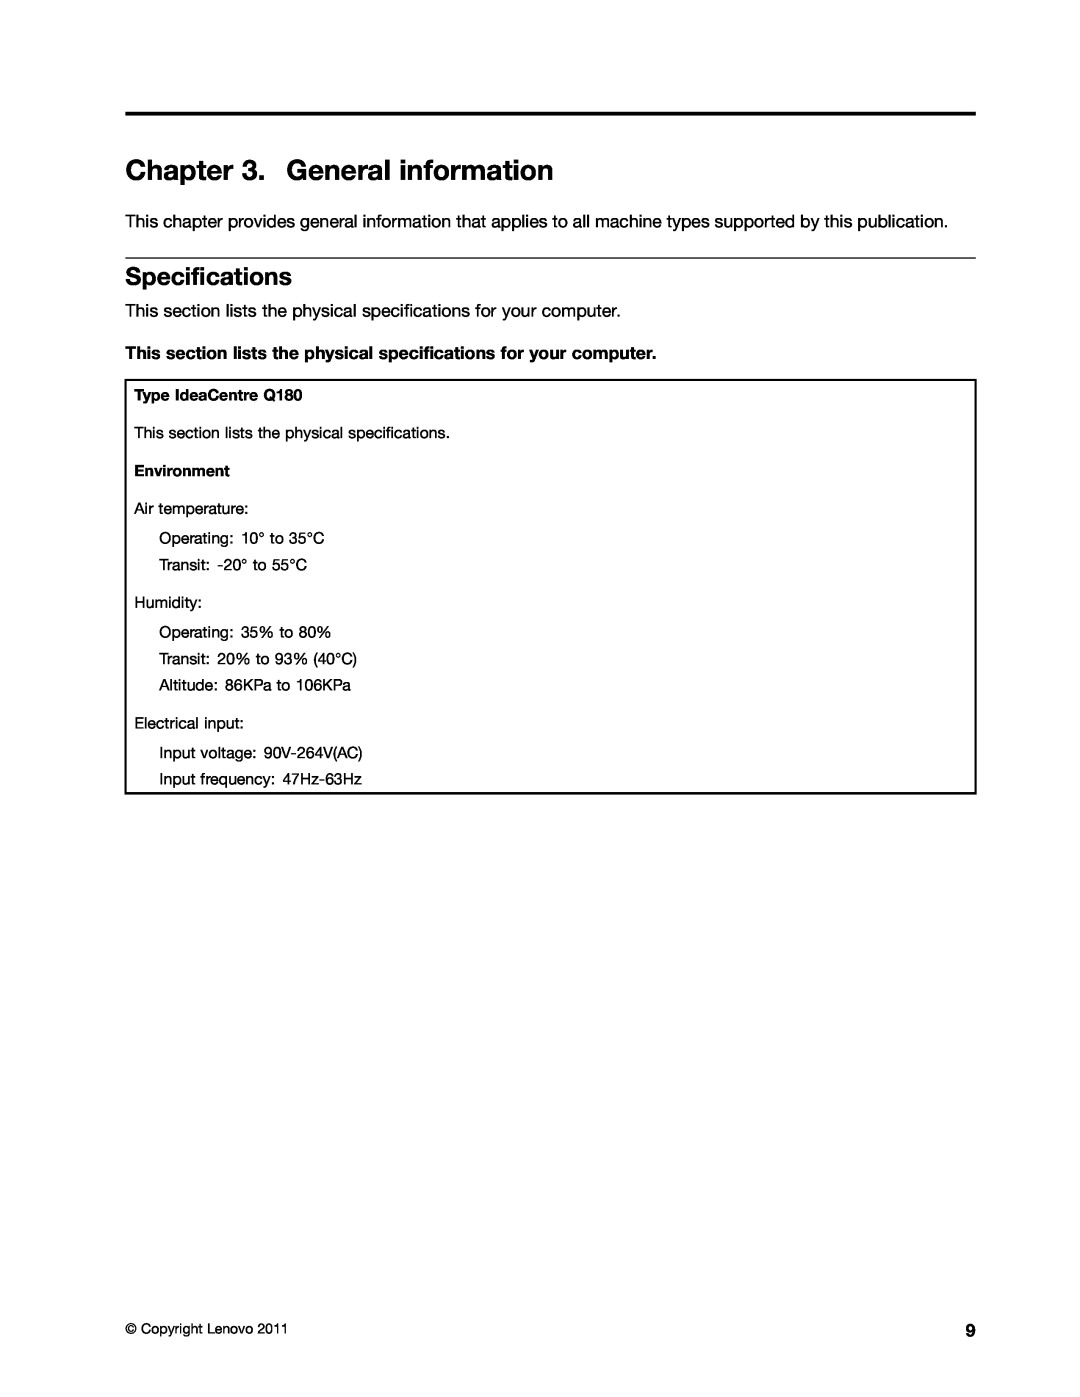 Lenovo manual General information, Specifications, Type IdeaCentre Q180, Environment 